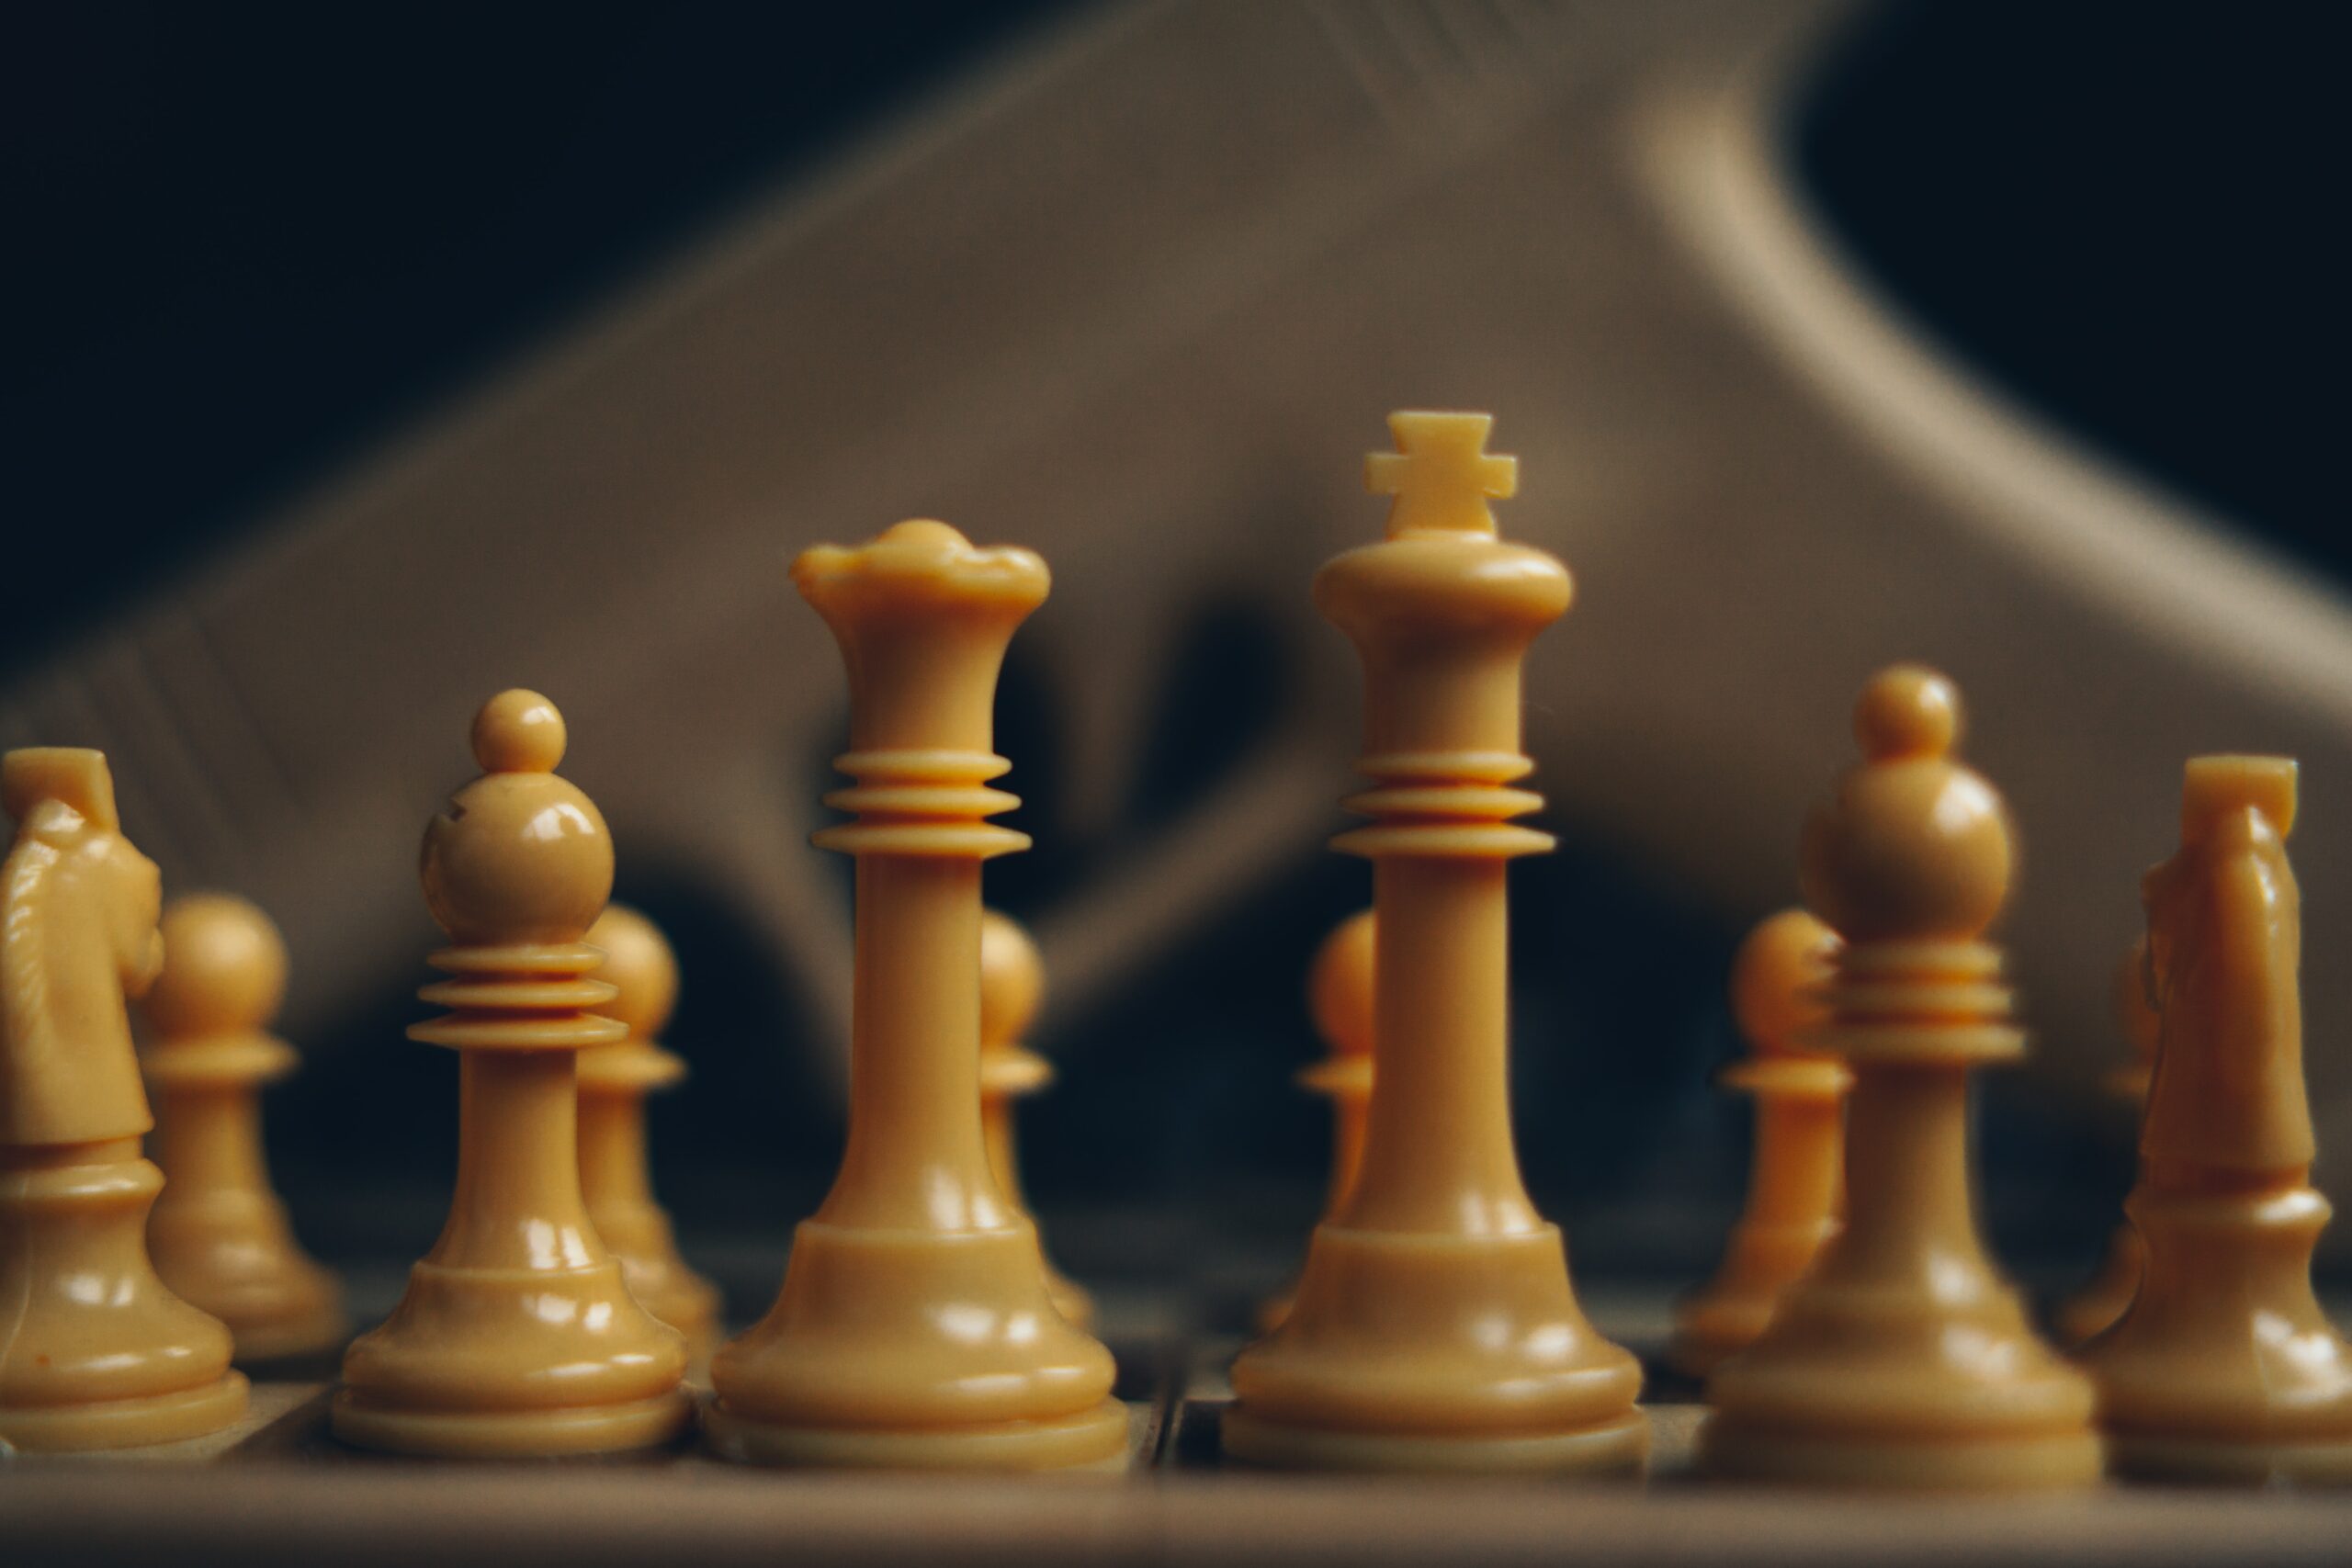 pawn structures influence the safety of queen